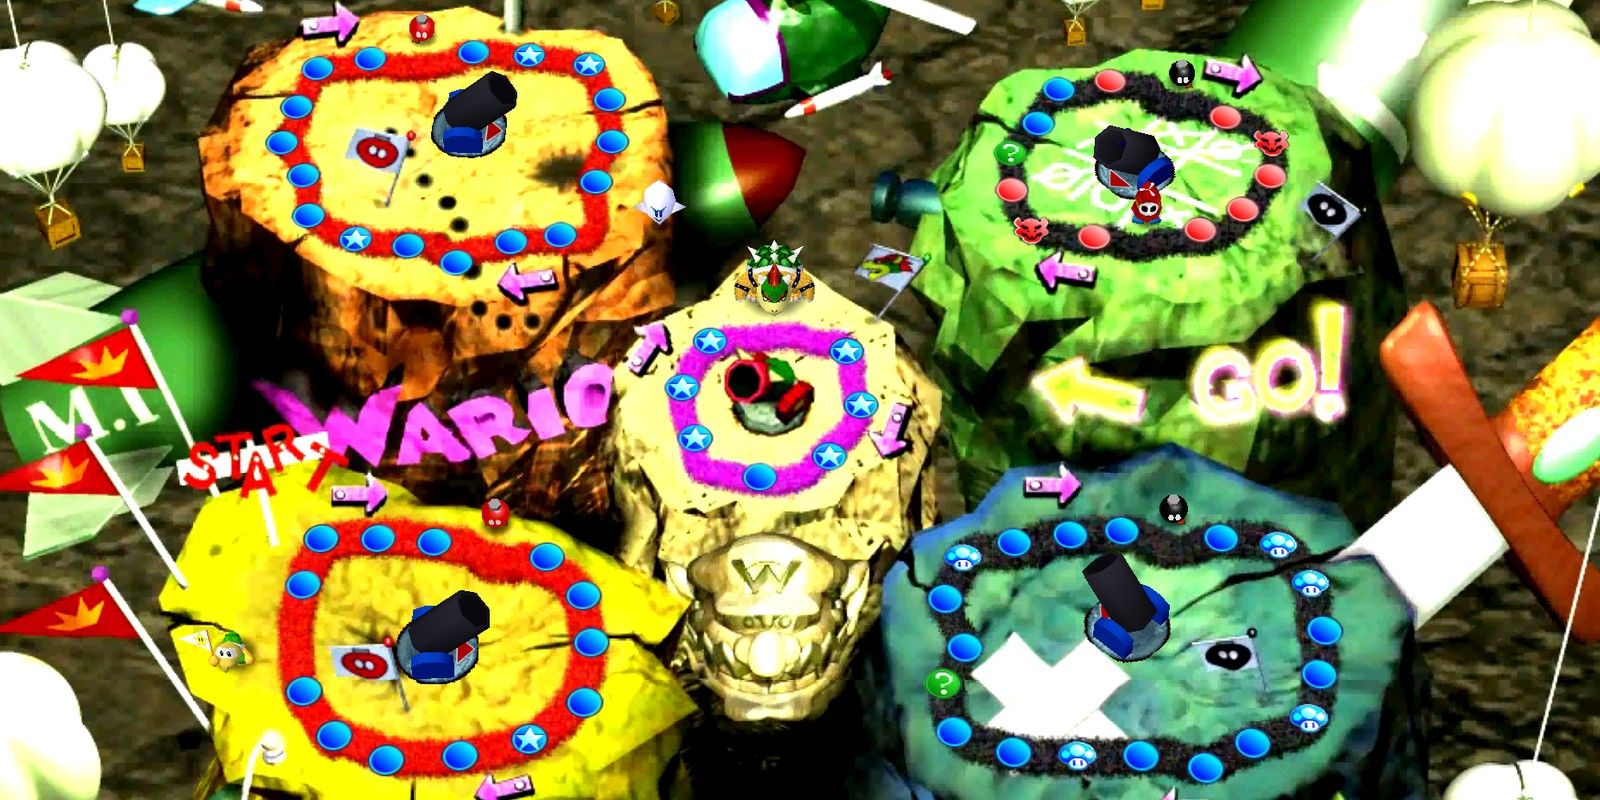 An overview of Wario's Battle Canyon from the first Mario Party